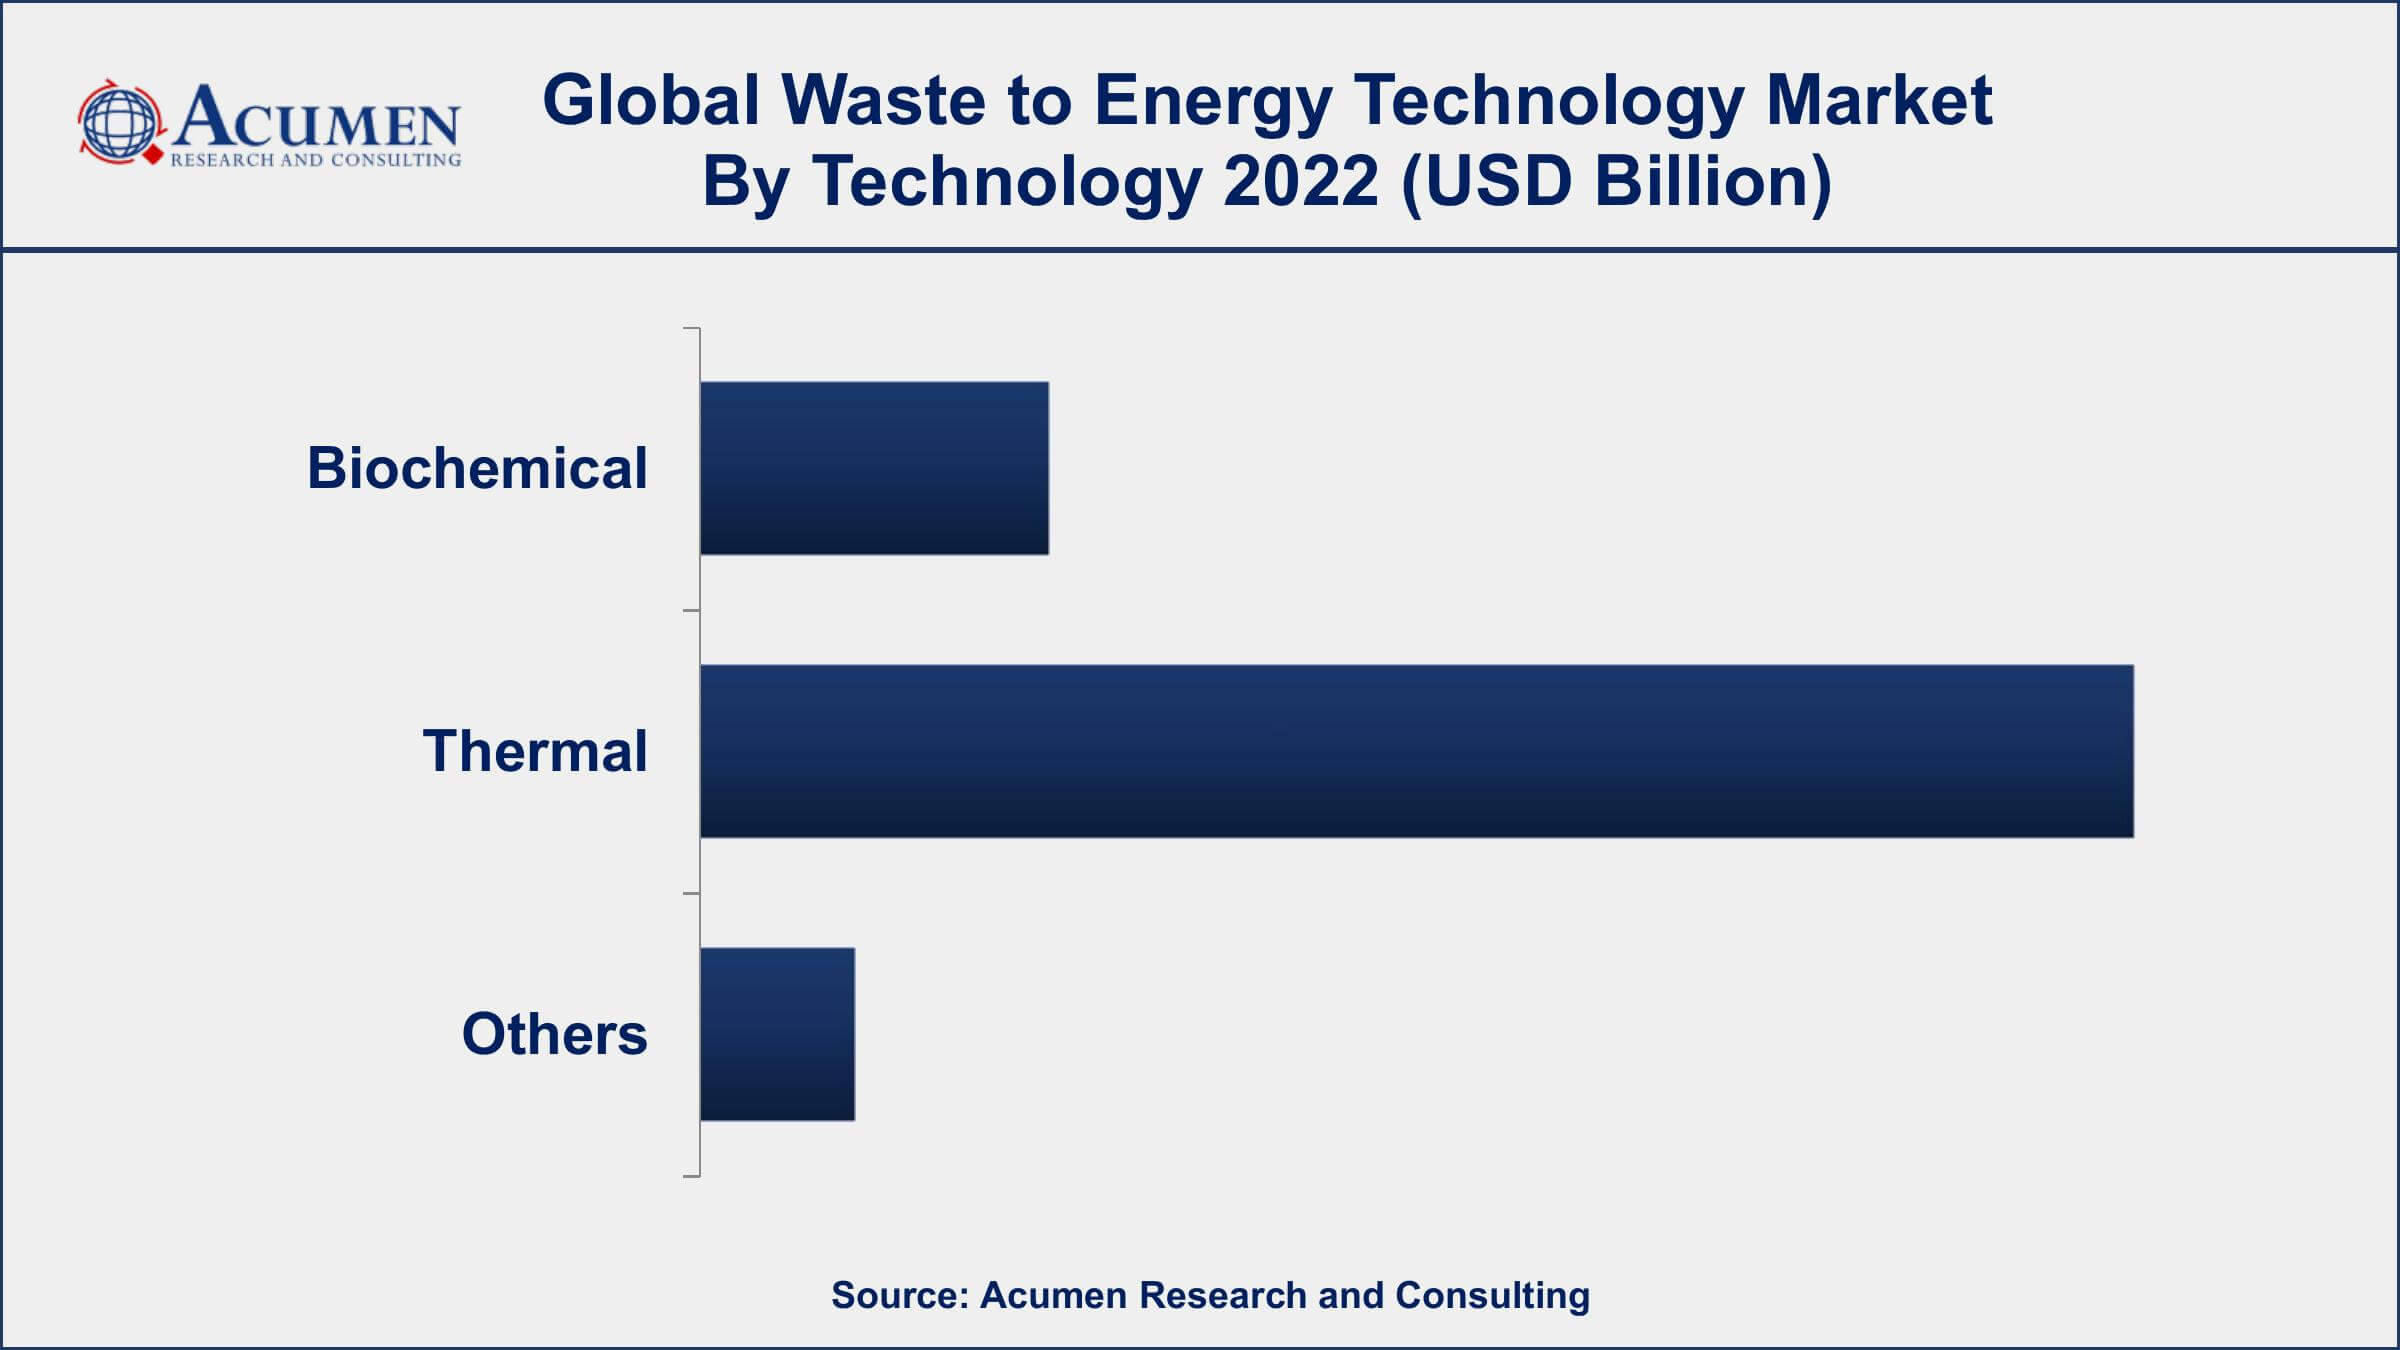 Waste to Energy Technology Market Drivers